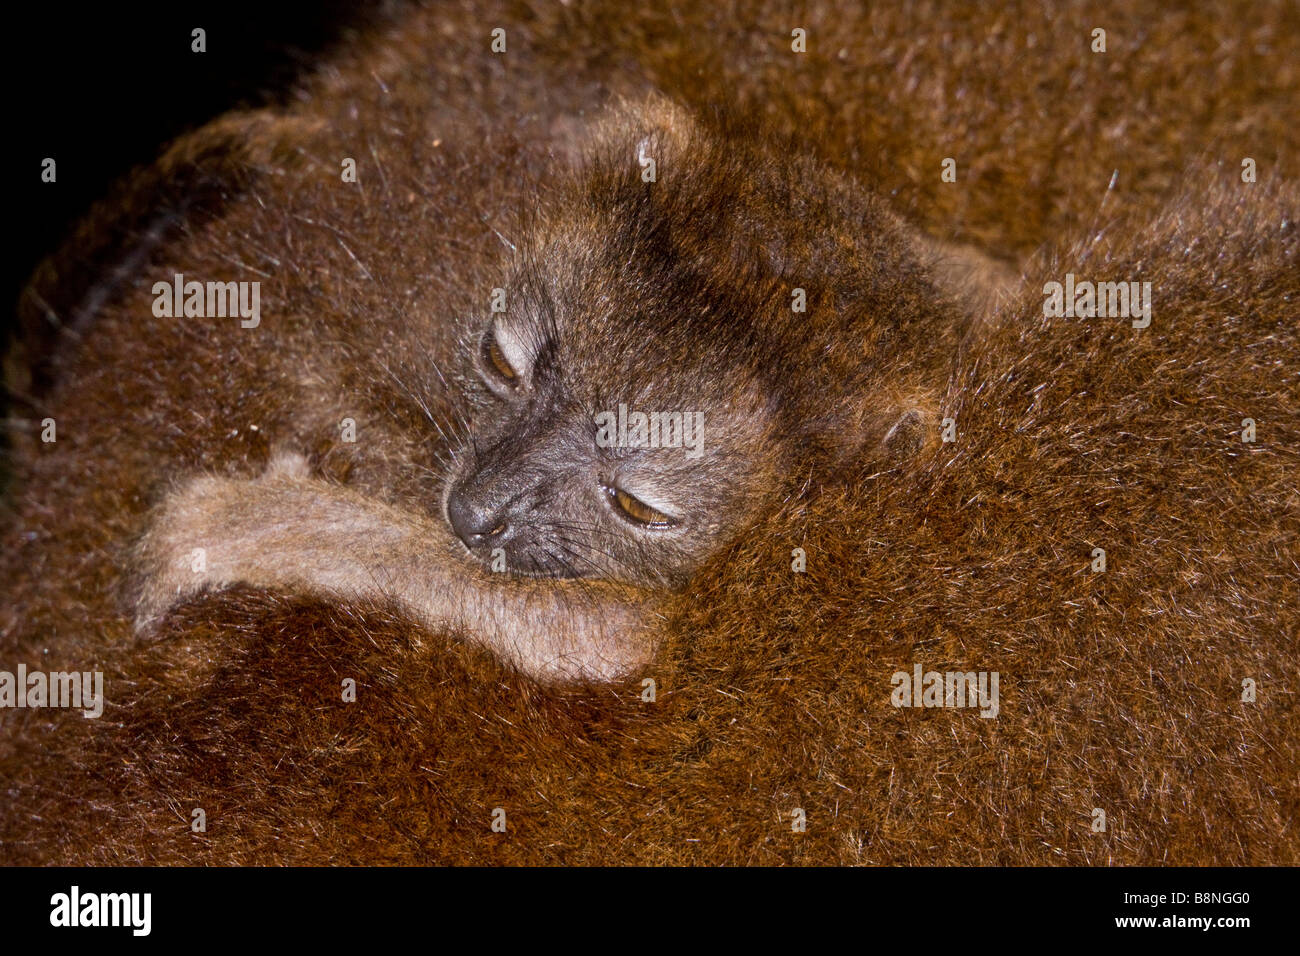 Young White fronted brown Lemur in mothers fur Nosy Mangabe Madagascar Stock Photo